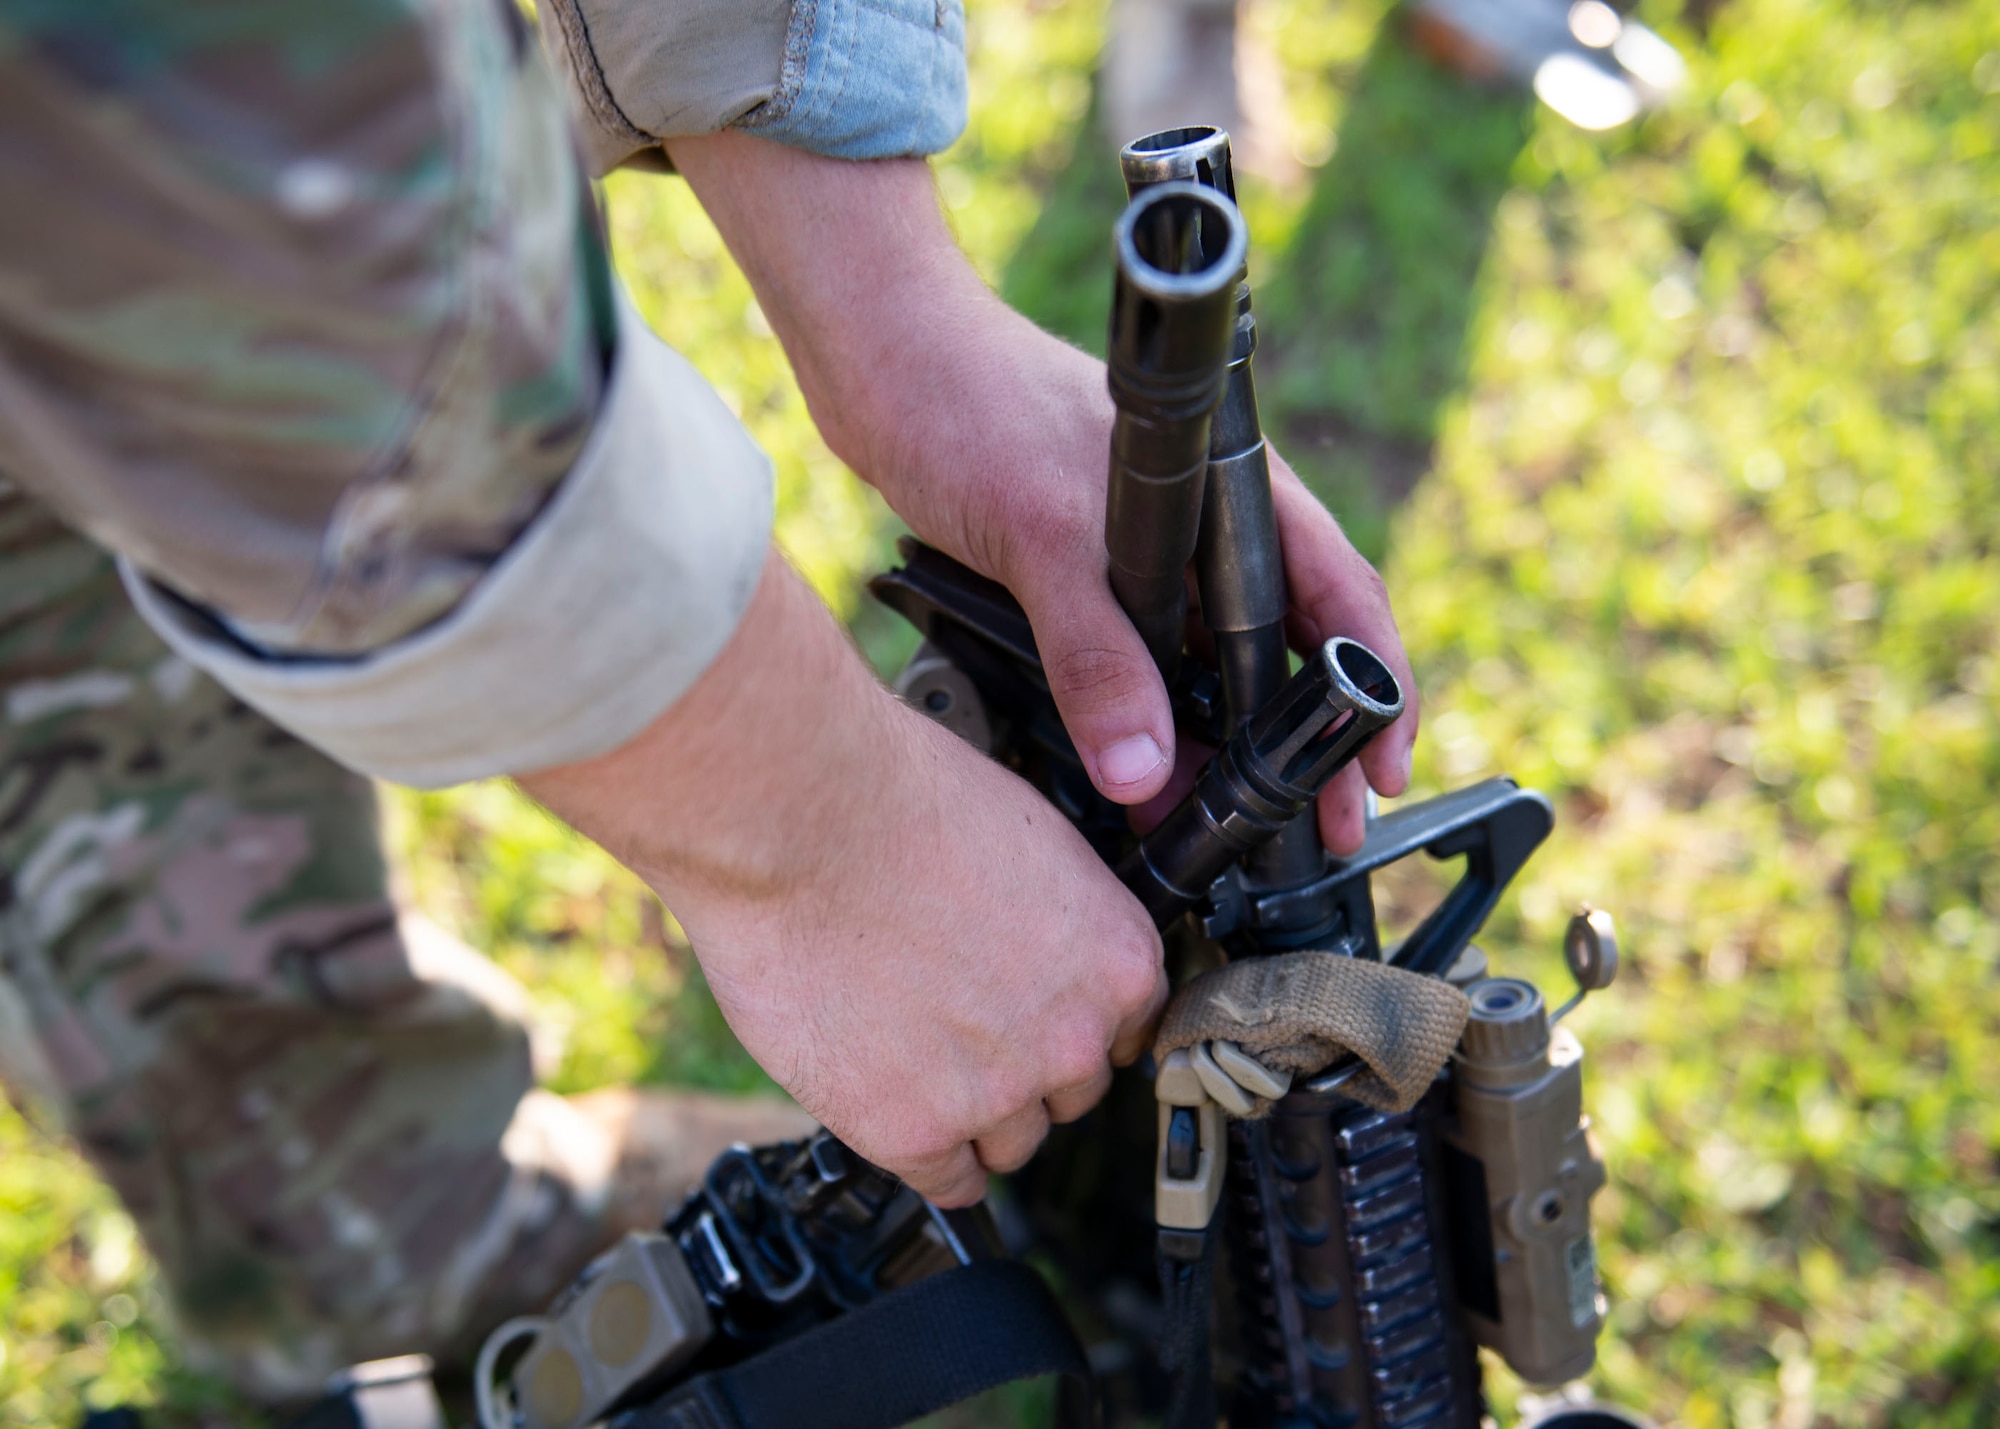 An Airman from the 824th Base Defense Squadron stacks weapons during the Tactical Leaders Course, Aug. 10, 2019, at Moody Air Force Base, Ga. The 7-day course revolved around squad leaders developing their skills to effectively communicate, team build and mission plan. These skills were assessed during a 36-hour simulated operation where squad leaders lead Airmen through tactical situations.  (U.S. Air Force photo by Airman Azaria E. Foster)